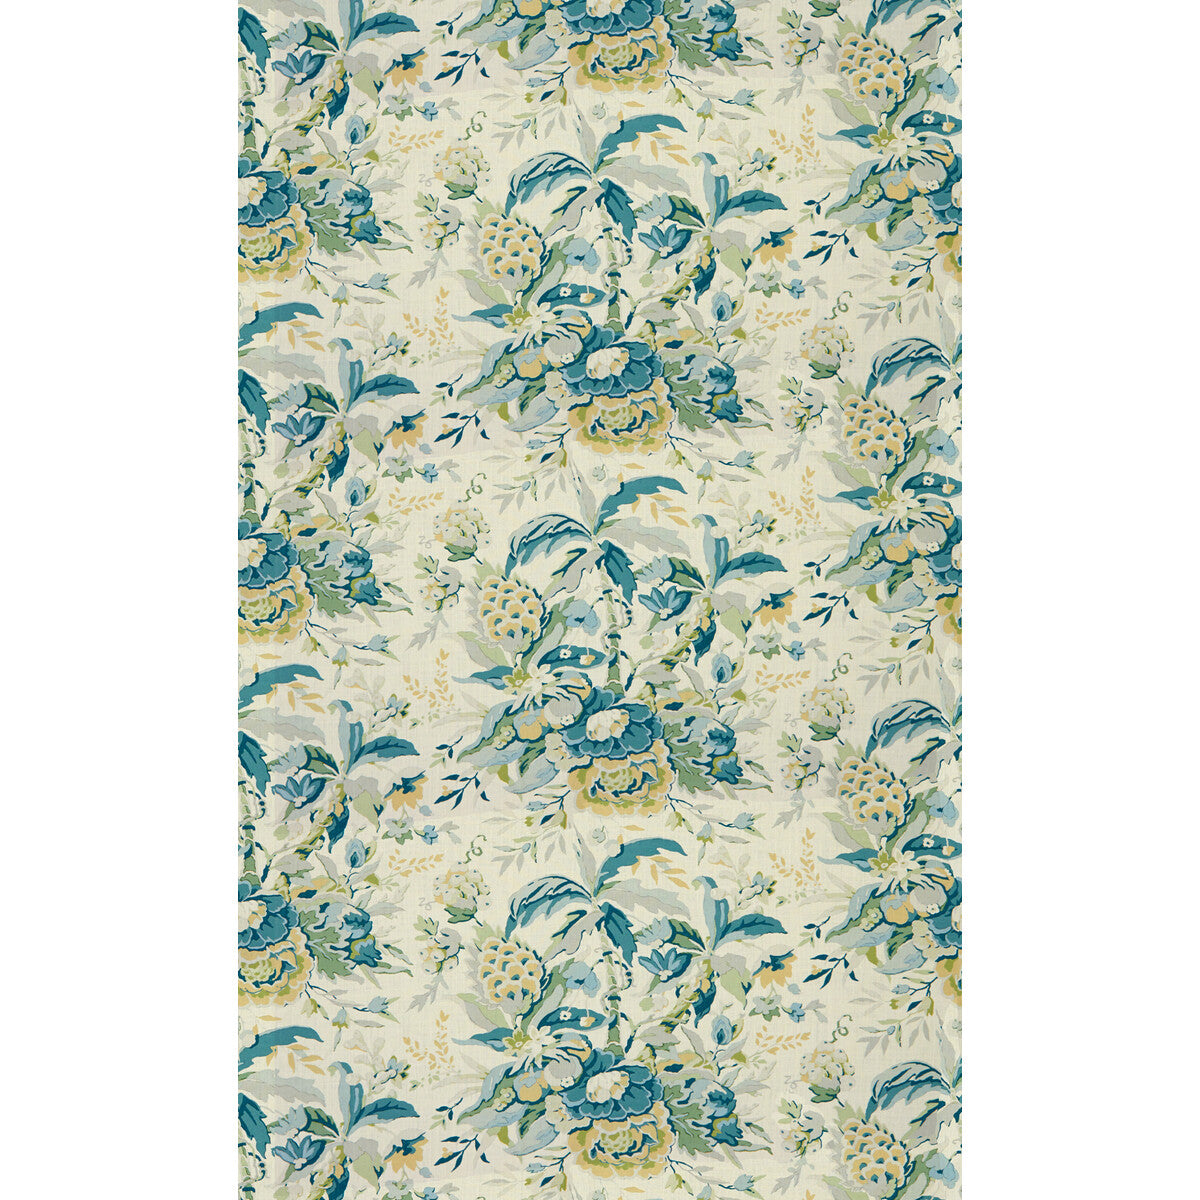 Horseshoe Bay fabric in aqua/green color - pattern 8015108.513.0 - by Brunschwig &amp; Fils in the Les Tropiques collection